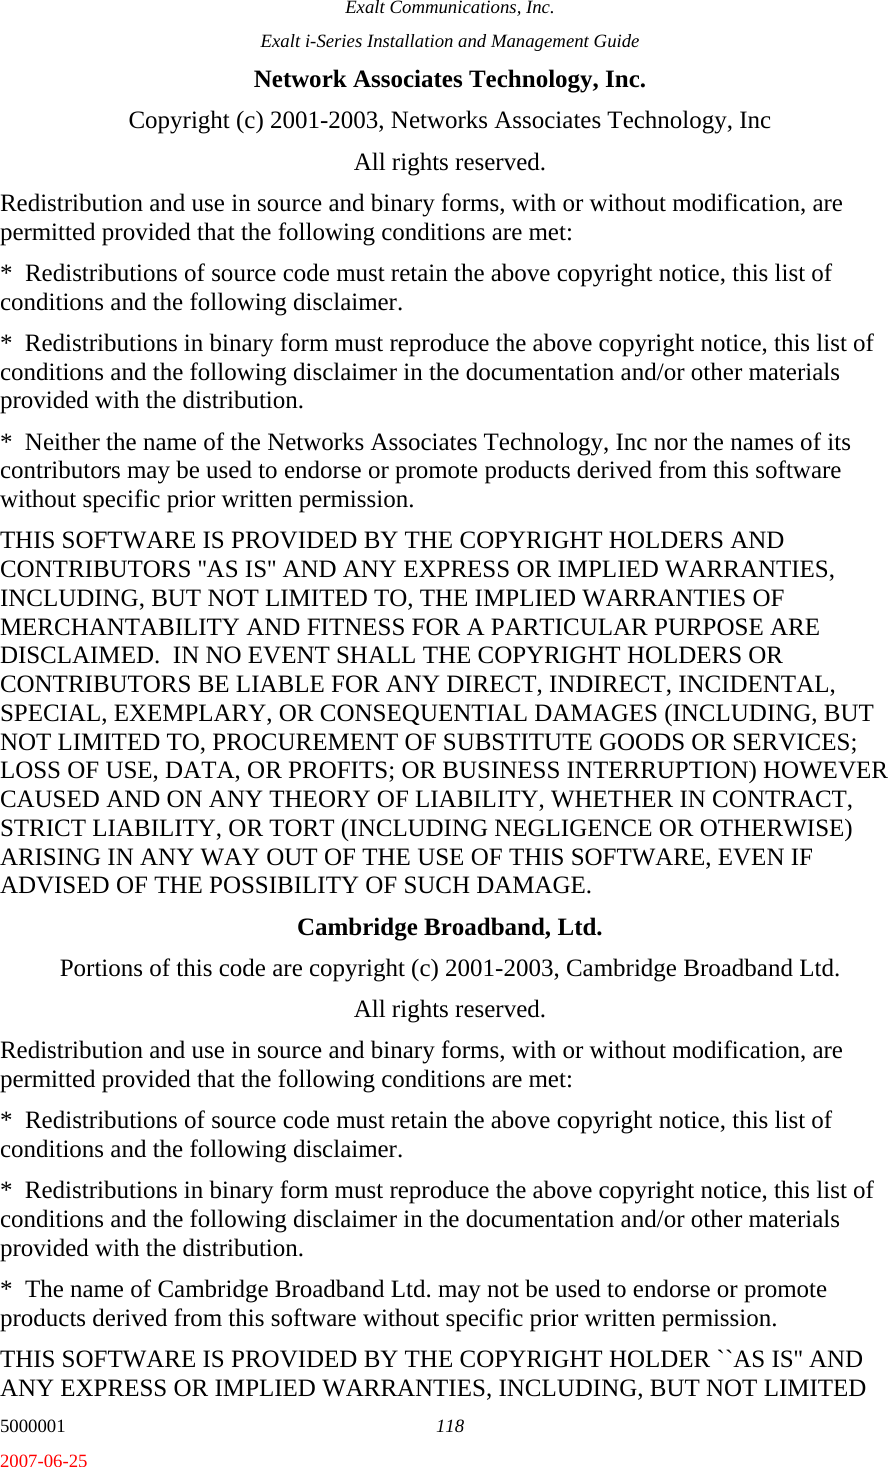 Exalt Communications, Inc. Exalt i-Series Installation and Management Guide 5000001  118 2007-06-25 Network Associates Technology, Inc. Copyright (c) 2001-2003, Networks Associates Technology, Inc All rights reserved. Redistribution and use in source and binary forms, with or without modification, are permitted provided that the following conditions are met: *  Redistributions of source code must retain the above copyright notice, this list of conditions and the following disclaimer. *  Redistributions in binary form must reproduce the above copyright notice, this list of conditions and the following disclaimer in the documentation and/or other materials provided with the distribution. *  Neither the name of the Networks Associates Technology, Inc nor the names of its contributors may be used to endorse or promote products derived from this software without specific prior written permission. THIS SOFTWARE IS PROVIDED BY THE COPYRIGHT HOLDERS AND CONTRIBUTORS &apos;&apos;AS IS&apos;&apos; AND ANY EXPRESS OR IMPLIED WARRANTIES, INCLUDING, BUT NOT LIMITED TO, THE IMPLIED WARRANTIES OF MERCHANTABILITY AND FITNESS FOR A PARTICULAR PURPOSE ARE DISCLAIMED.  IN NO EVENT SHALL THE COPYRIGHT HOLDERS OR CONTRIBUTORS BE LIABLE FOR ANY DIRECT, INDIRECT, INCIDENTAL, SPECIAL, EXEMPLARY, OR CONSEQUENTIAL DAMAGES (INCLUDING, BUT NOT LIMITED TO, PROCUREMENT OF SUBSTITUTE GOODS OR SERVICES; LOSS OF USE, DATA, OR PROFITS; OR BUSINESS INTERRUPTION) HOWEVER CAUSED AND ON ANY THEORY OF LIABILITY, WHETHER IN CONTRACT, STRICT LIABILITY, OR TORT (INCLUDING NEGLIGENCE OR OTHERWISE) ARISING IN ANY WAY OUT OF THE USE OF THIS SOFTWARE, EVEN IF ADVISED OF THE POSSIBILITY OF SUCH DAMAGE. Cambridge Broadband, Ltd. Portions of this code are copyright (c) 2001-2003, Cambridge Broadband Ltd. All rights reserved. Redistribution and use in source and binary forms, with or without modification, are permitted provided that the following conditions are met: *  Redistributions of source code must retain the above copyright notice, this list of conditions and the following disclaimer. *  Redistributions in binary form must reproduce the above copyright notice, this list of conditions and the following disclaimer in the documentation and/or other materials provided with the distribution. *  The name of Cambridge Broadband Ltd. may not be used to endorse or promote products derived from this software without specific prior written permission. THIS SOFTWARE IS PROVIDED BY THE COPYRIGHT HOLDER ``AS IS&apos;&apos; AND ANY EXPRESS OR IMPLIED WARRANTIES, INCLUDING, BUT NOT LIMITED 